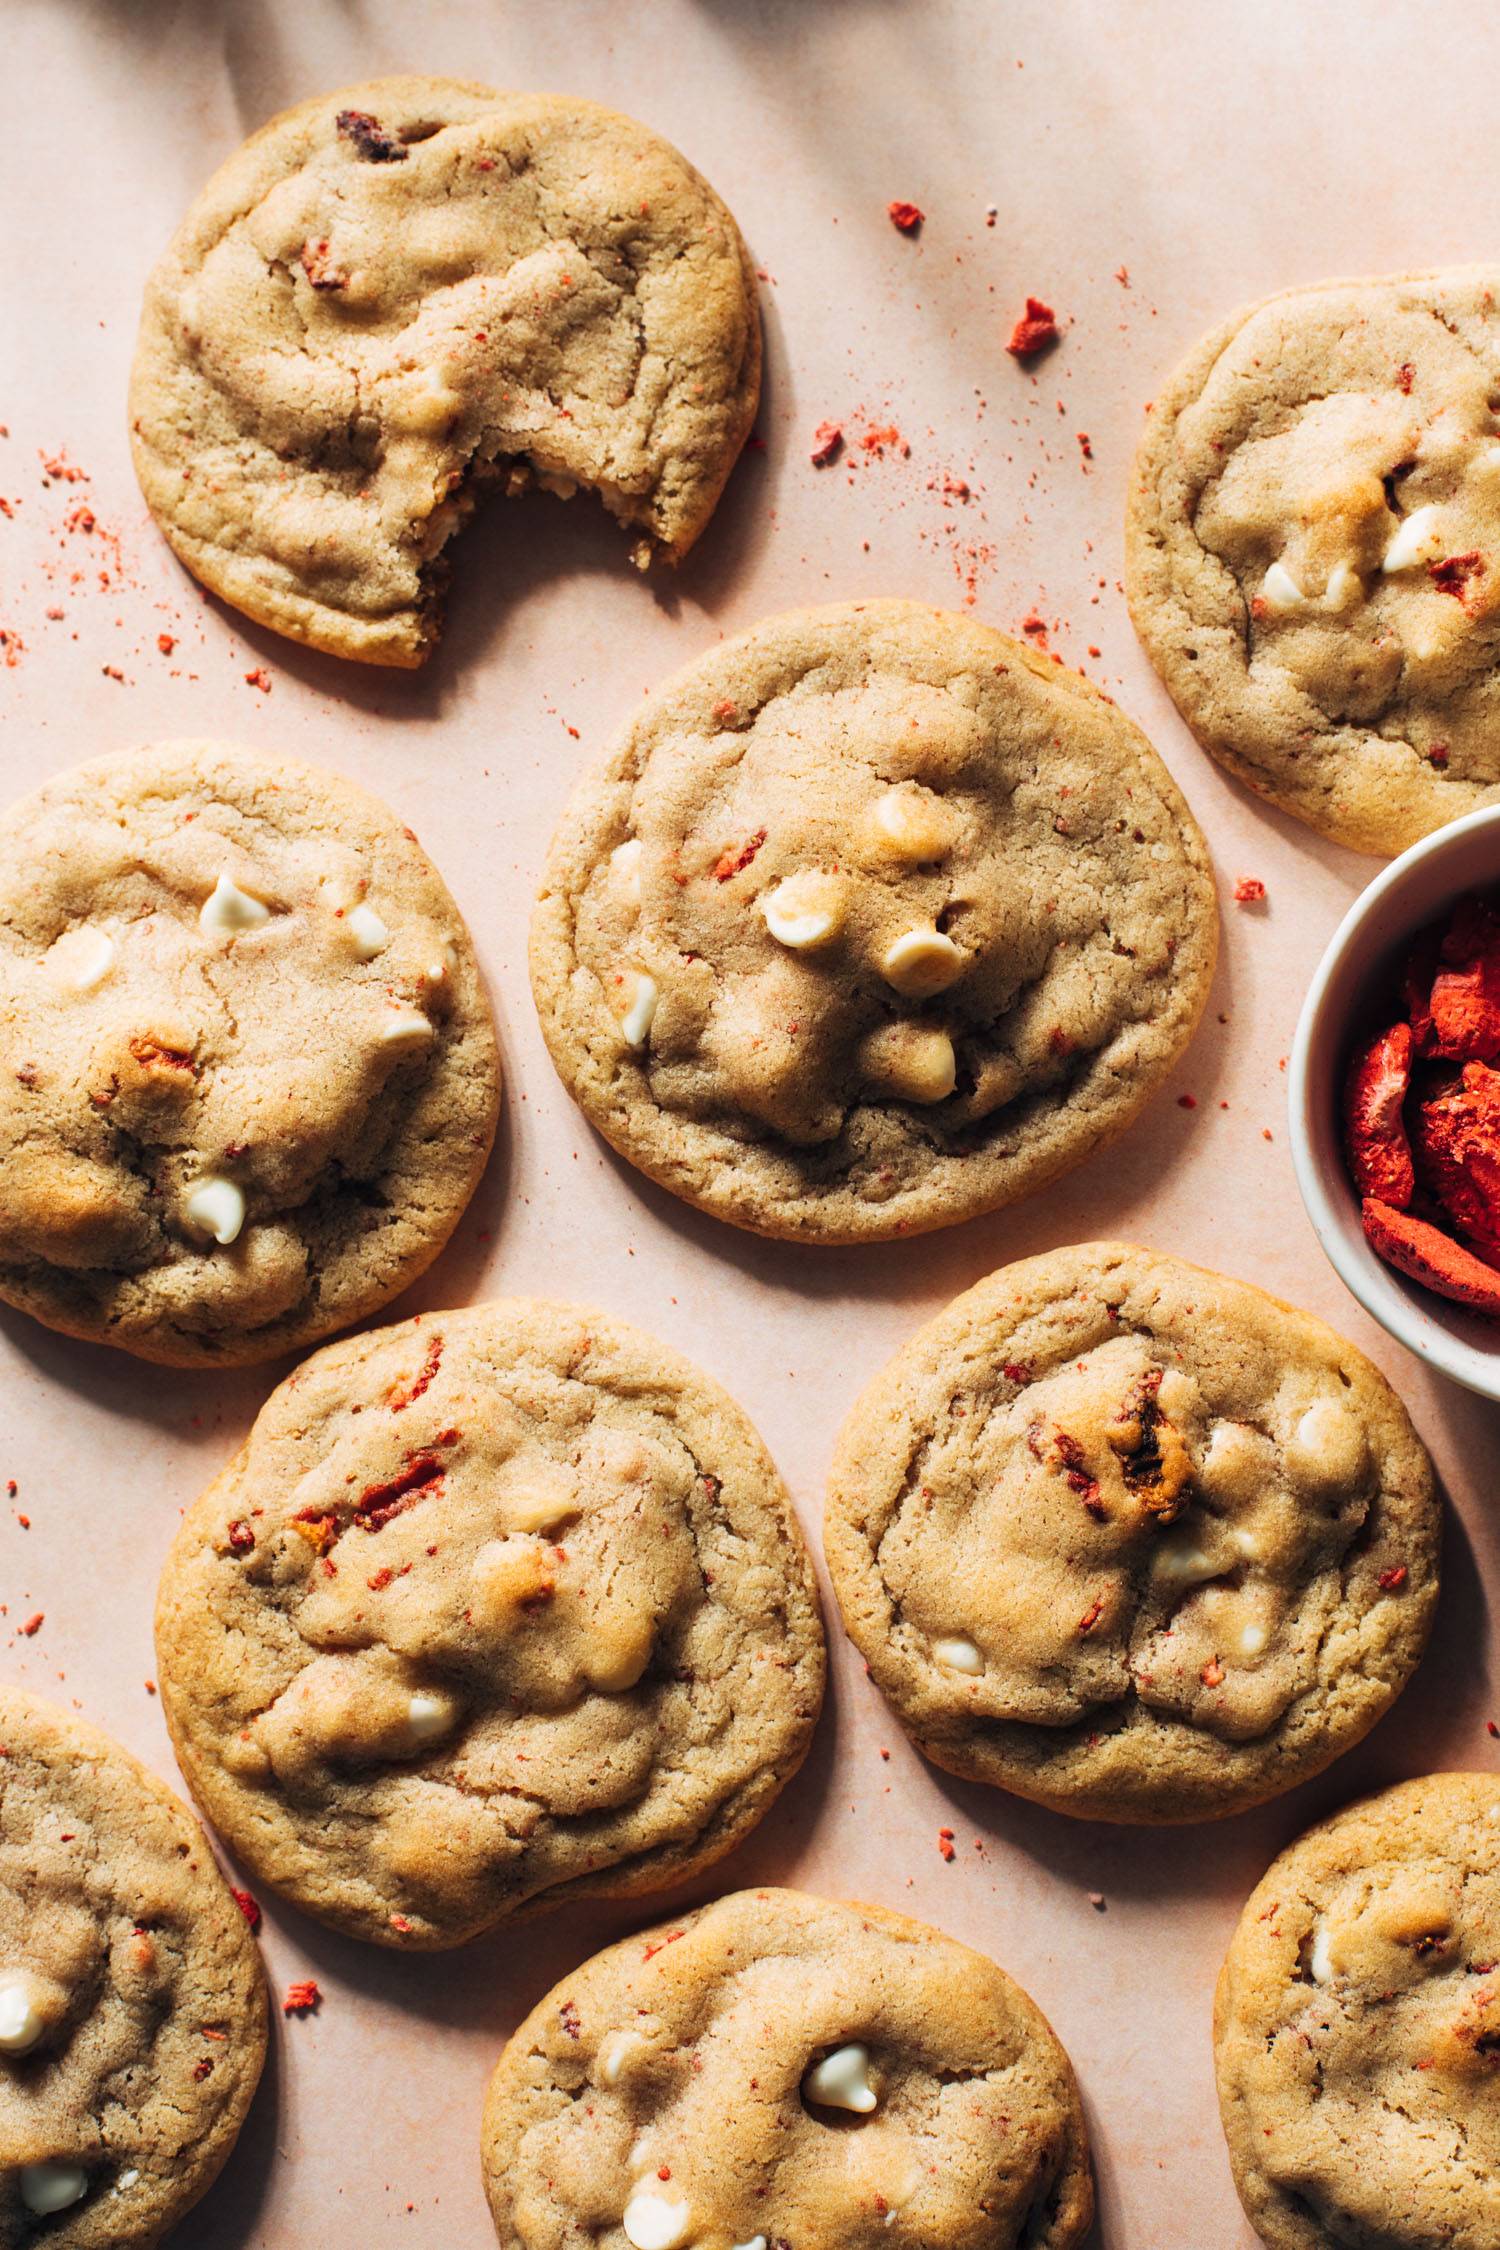 Strawberry white chocolate cookies with freeze-dried strawberries in a dish